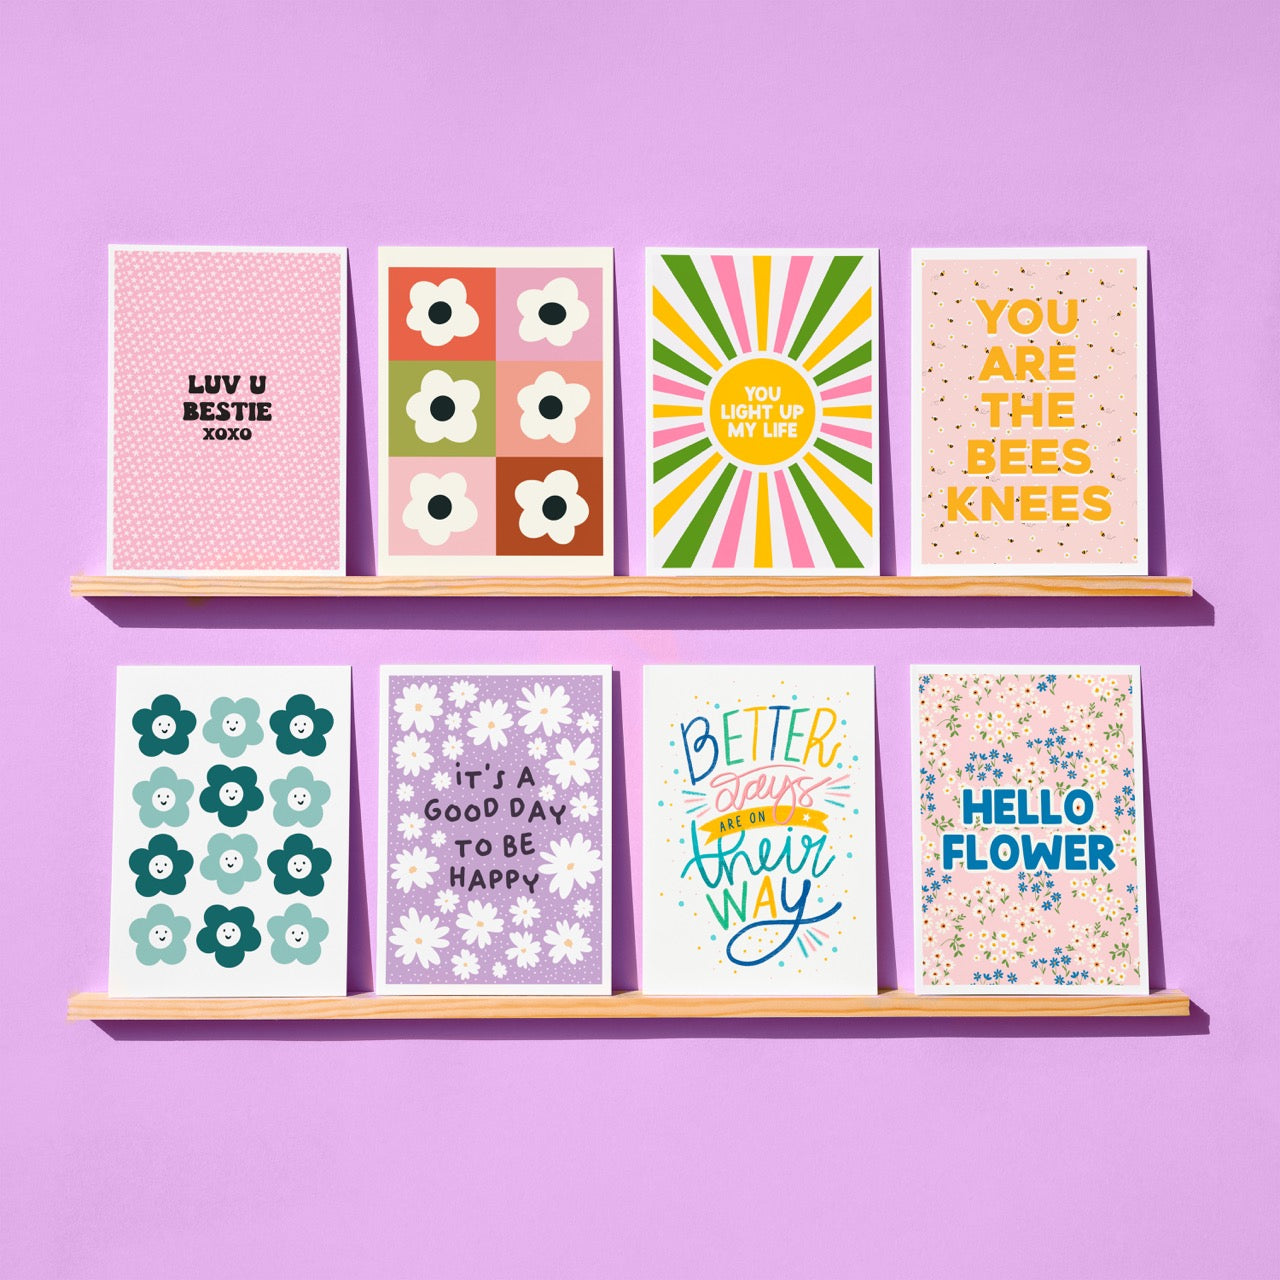 It's A Good Day To Be Happy A6 Greetings Card